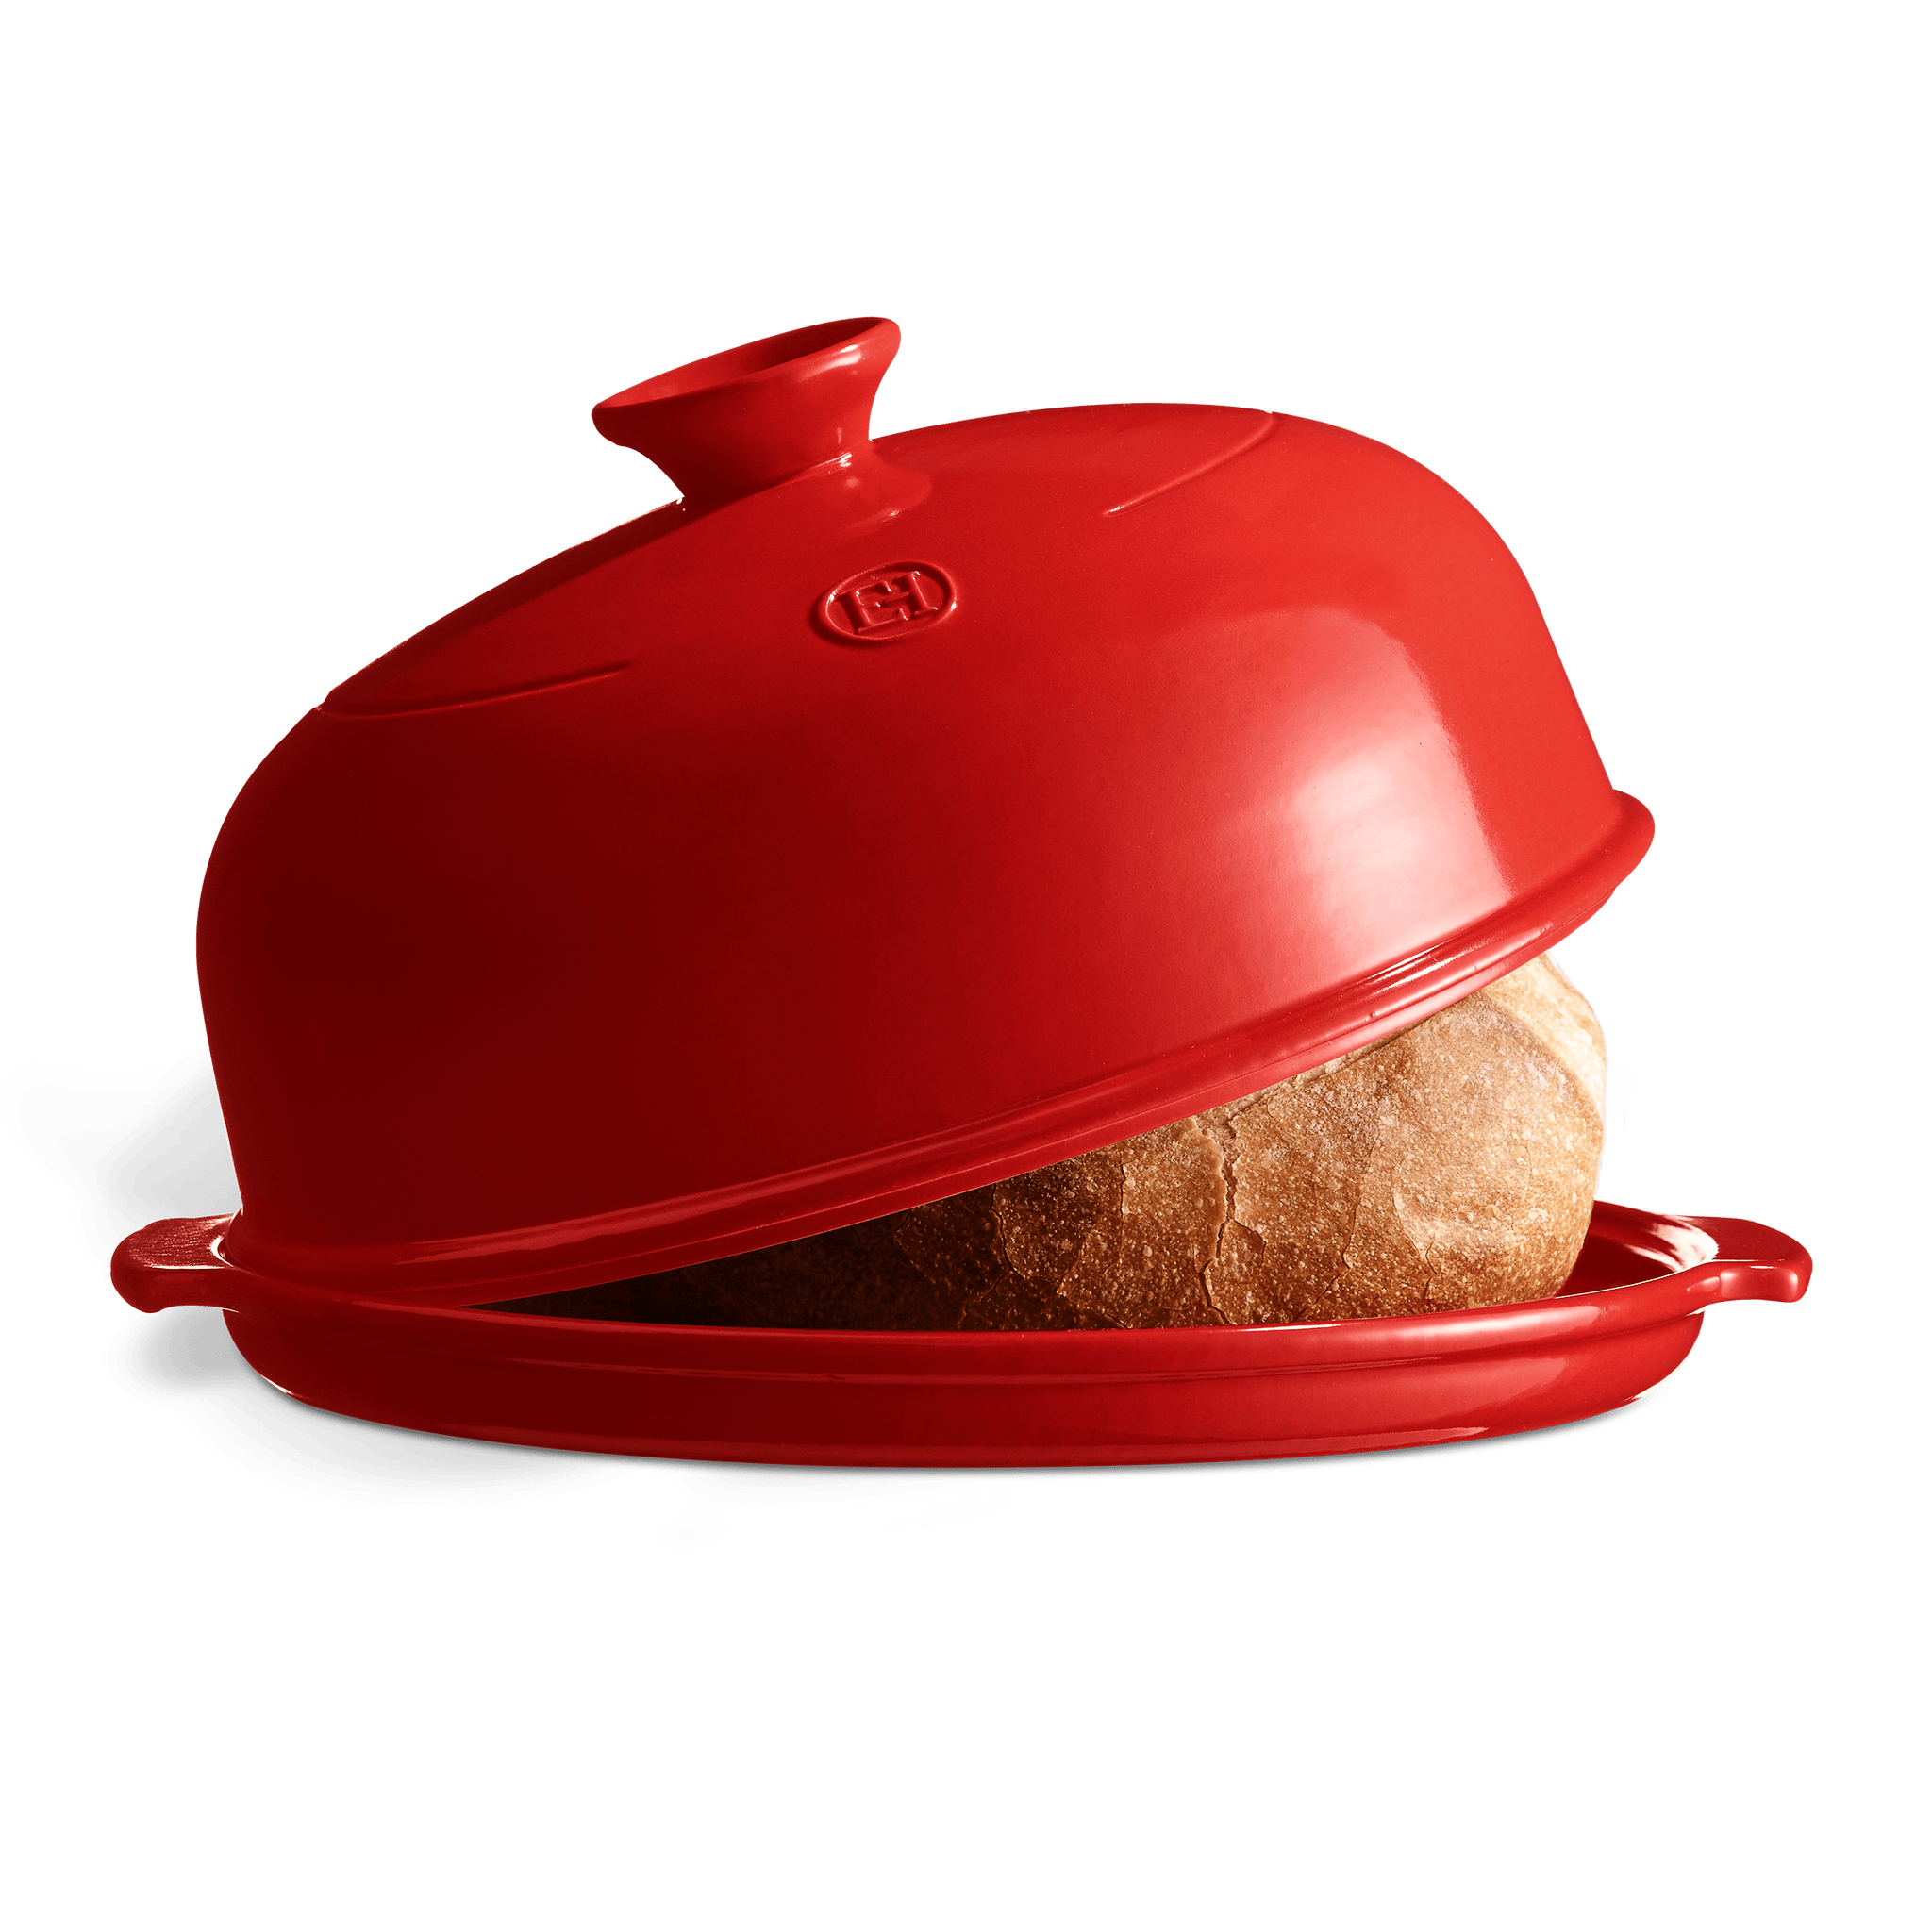 Cloche Bread Baker With Handle